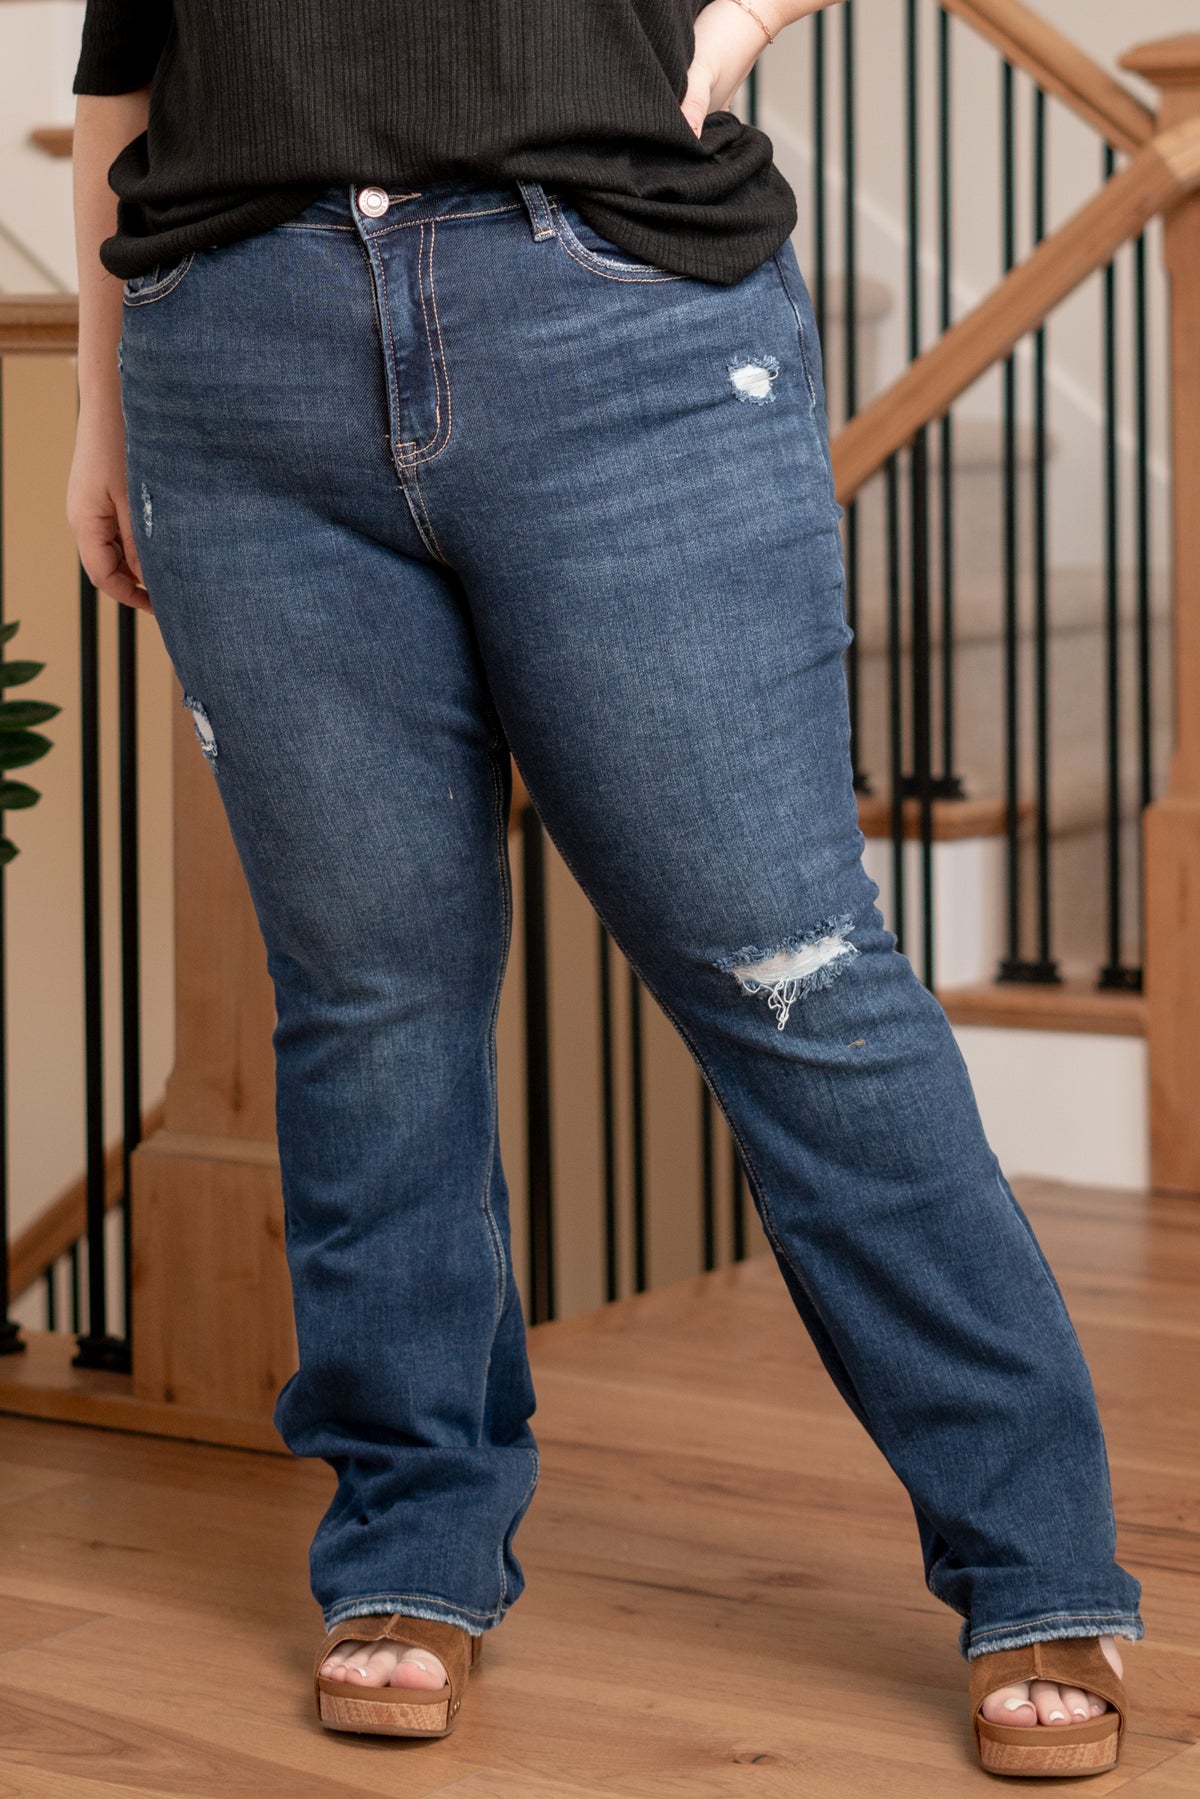 Lovervet by VERVET   Step into effortless style with the Advantages High Rise Flare jeans featuring distressed details. These jeans offer a flattering high-rise silhouette and a chic flare leg, creating a perfect blend of sophistication and casual flair. The distressed details add a touch of edge, making them a versatile choice for both laid-back and elevated look